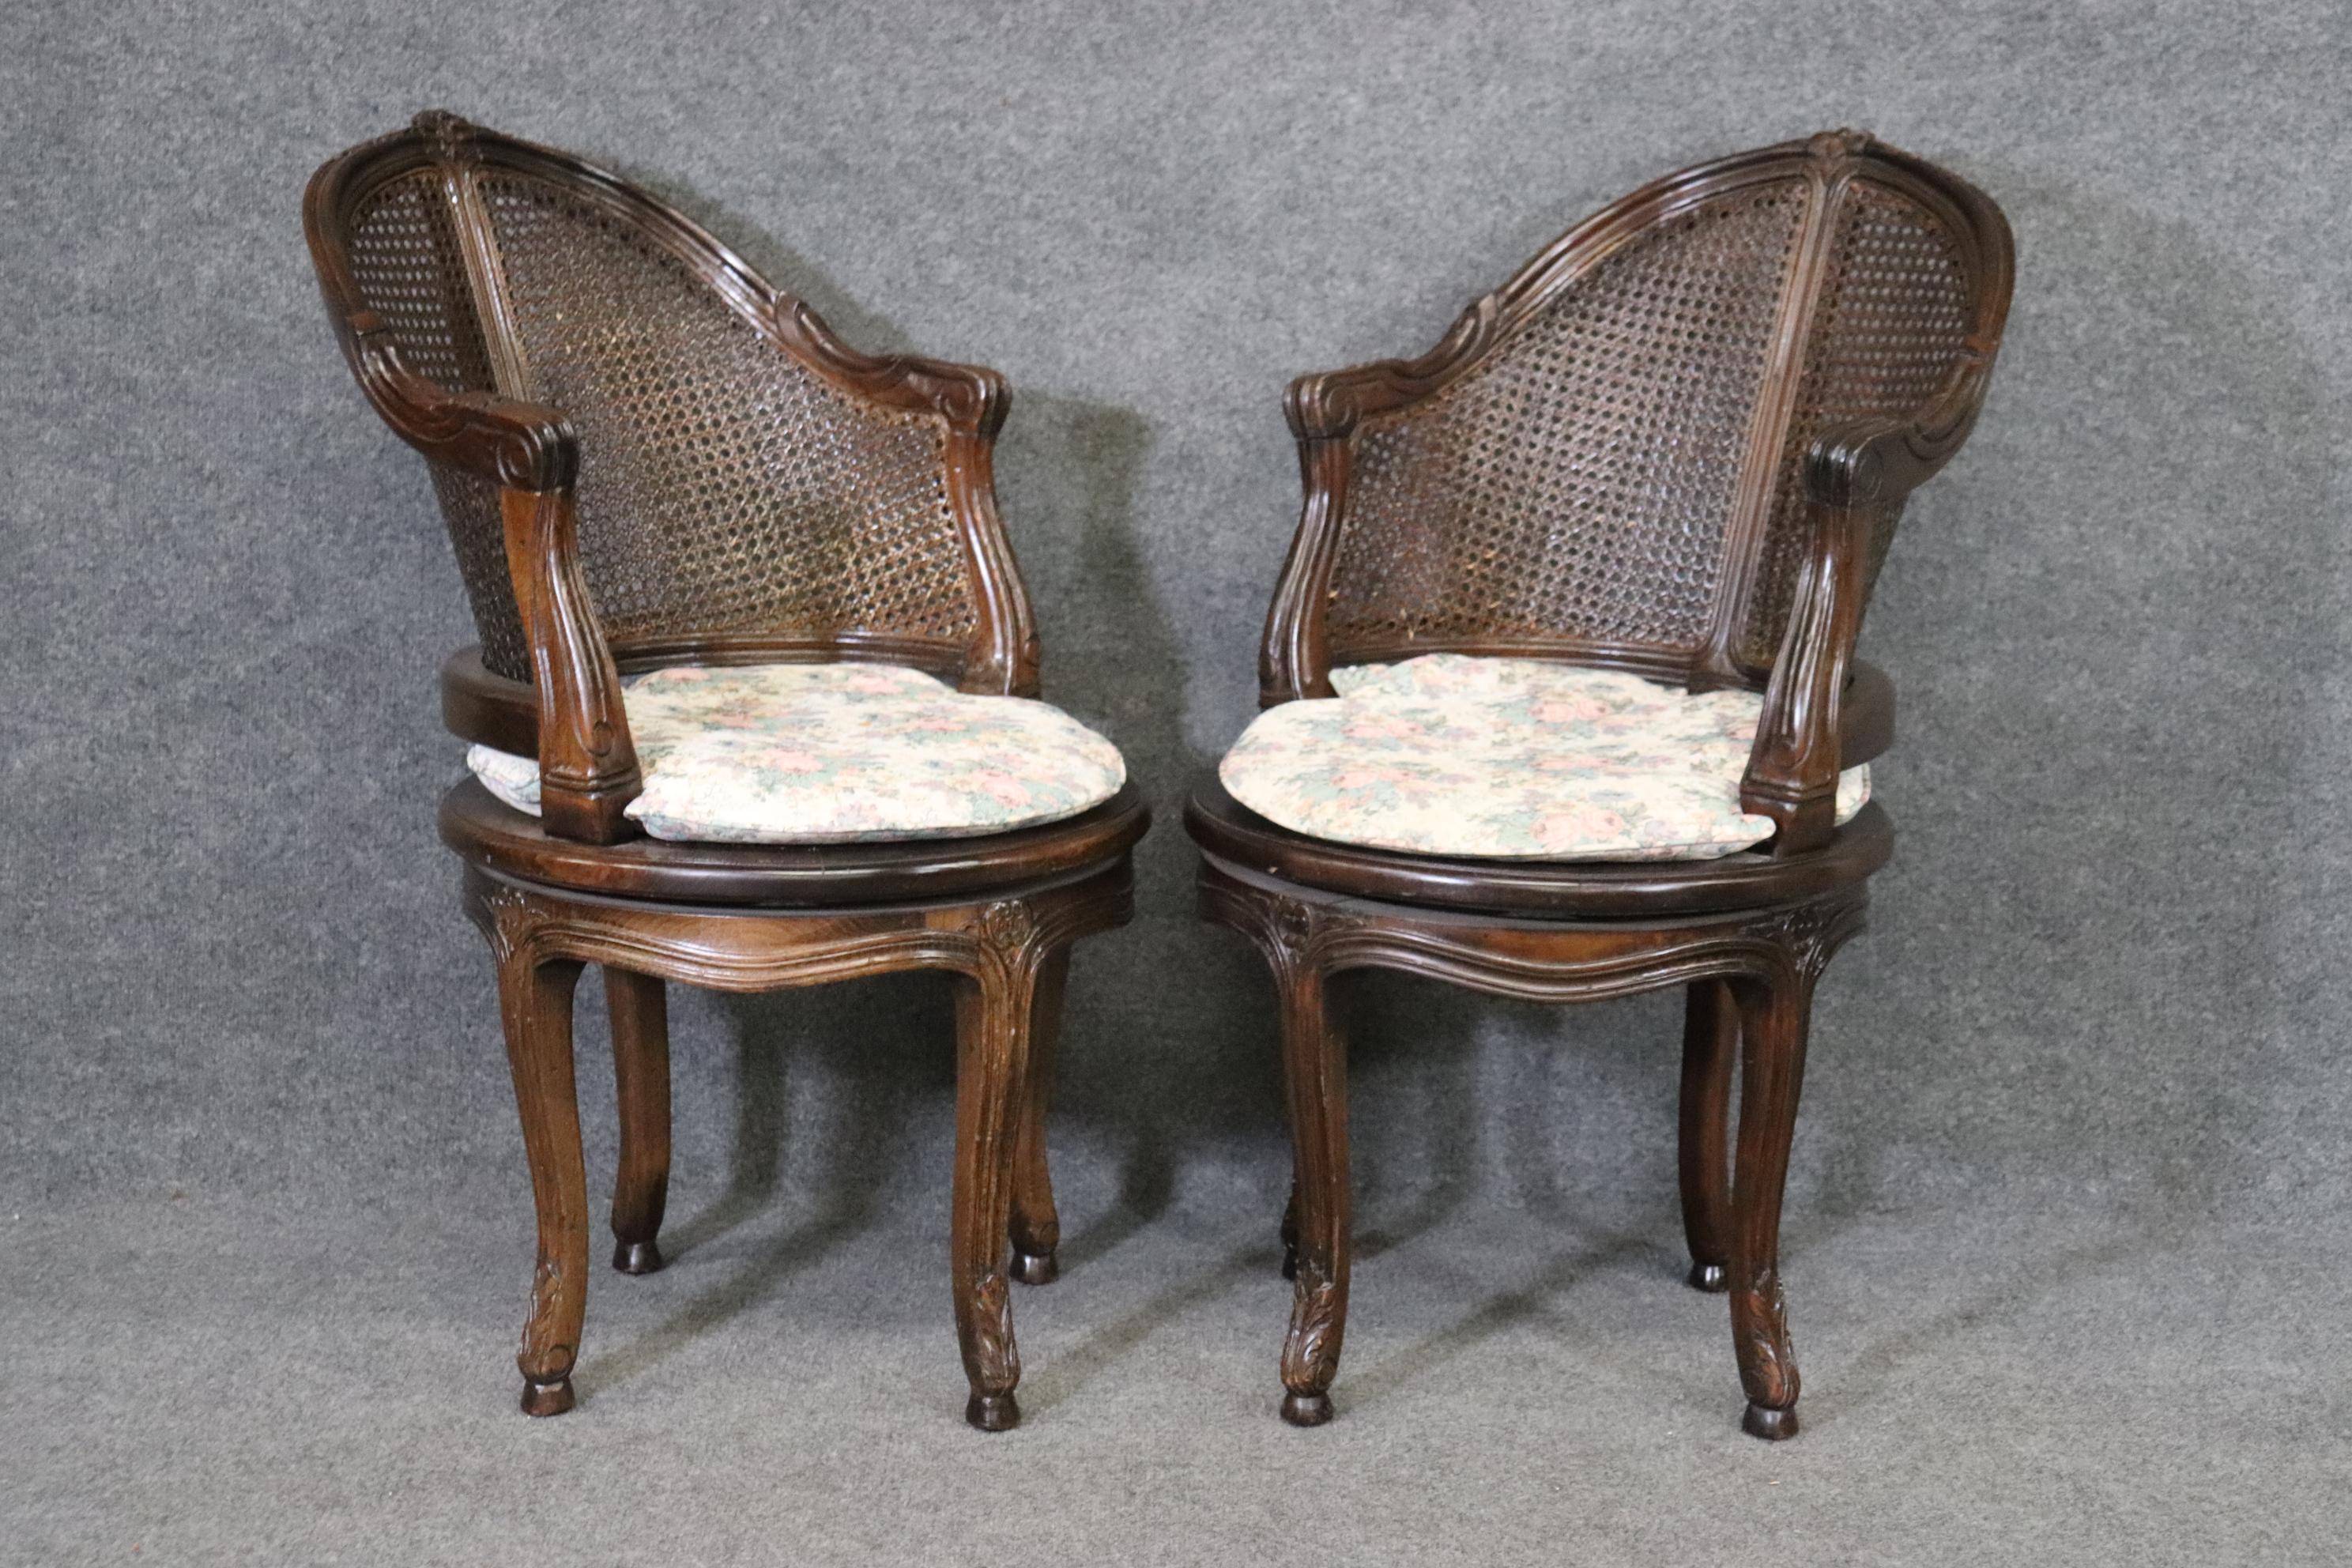 This is a beautiful pair of 1930-40s era swiveling corner chairs in the Louis XV style. The chairs are in good vintageb condition and may have some small losses to the finish on the cane but no damages that I can finid to the actual cane surfaces.